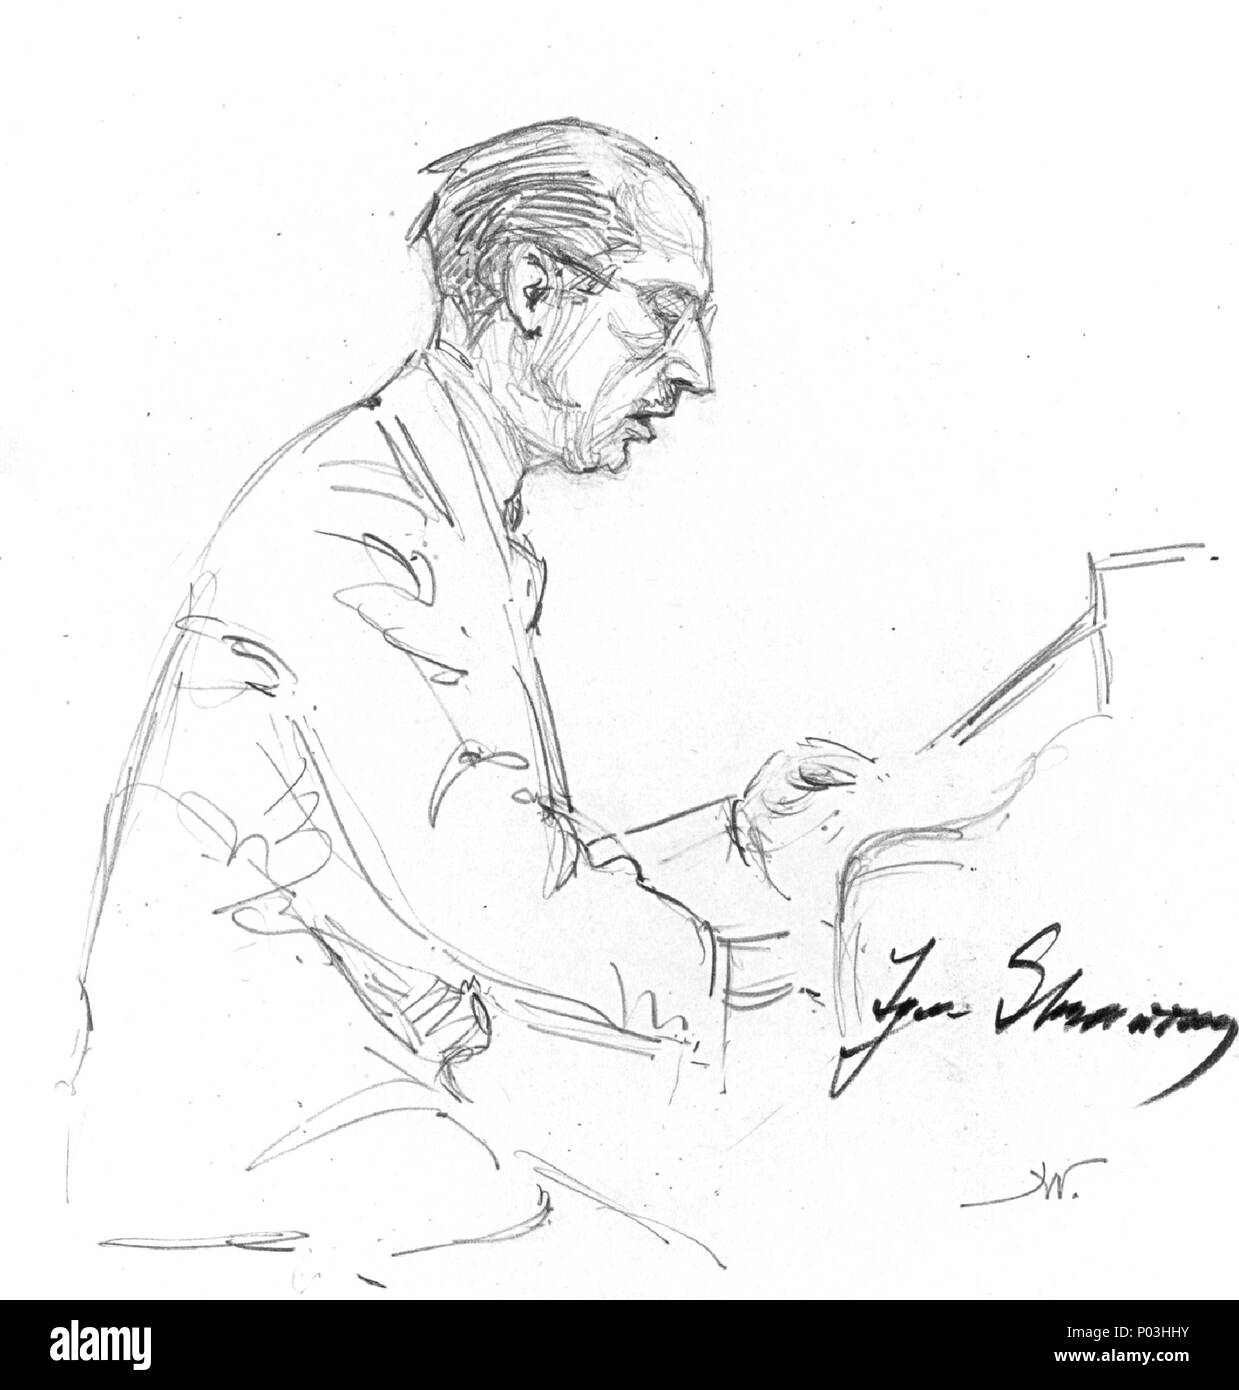 English: Igor Stravinsky playing the Capriccio for Piano and Orchestra  pencil on paper 16.8 x 22.8 cm cropped to 16.8 x 17.6 cm signed l.r.: HW  signed by the performer l.r.: